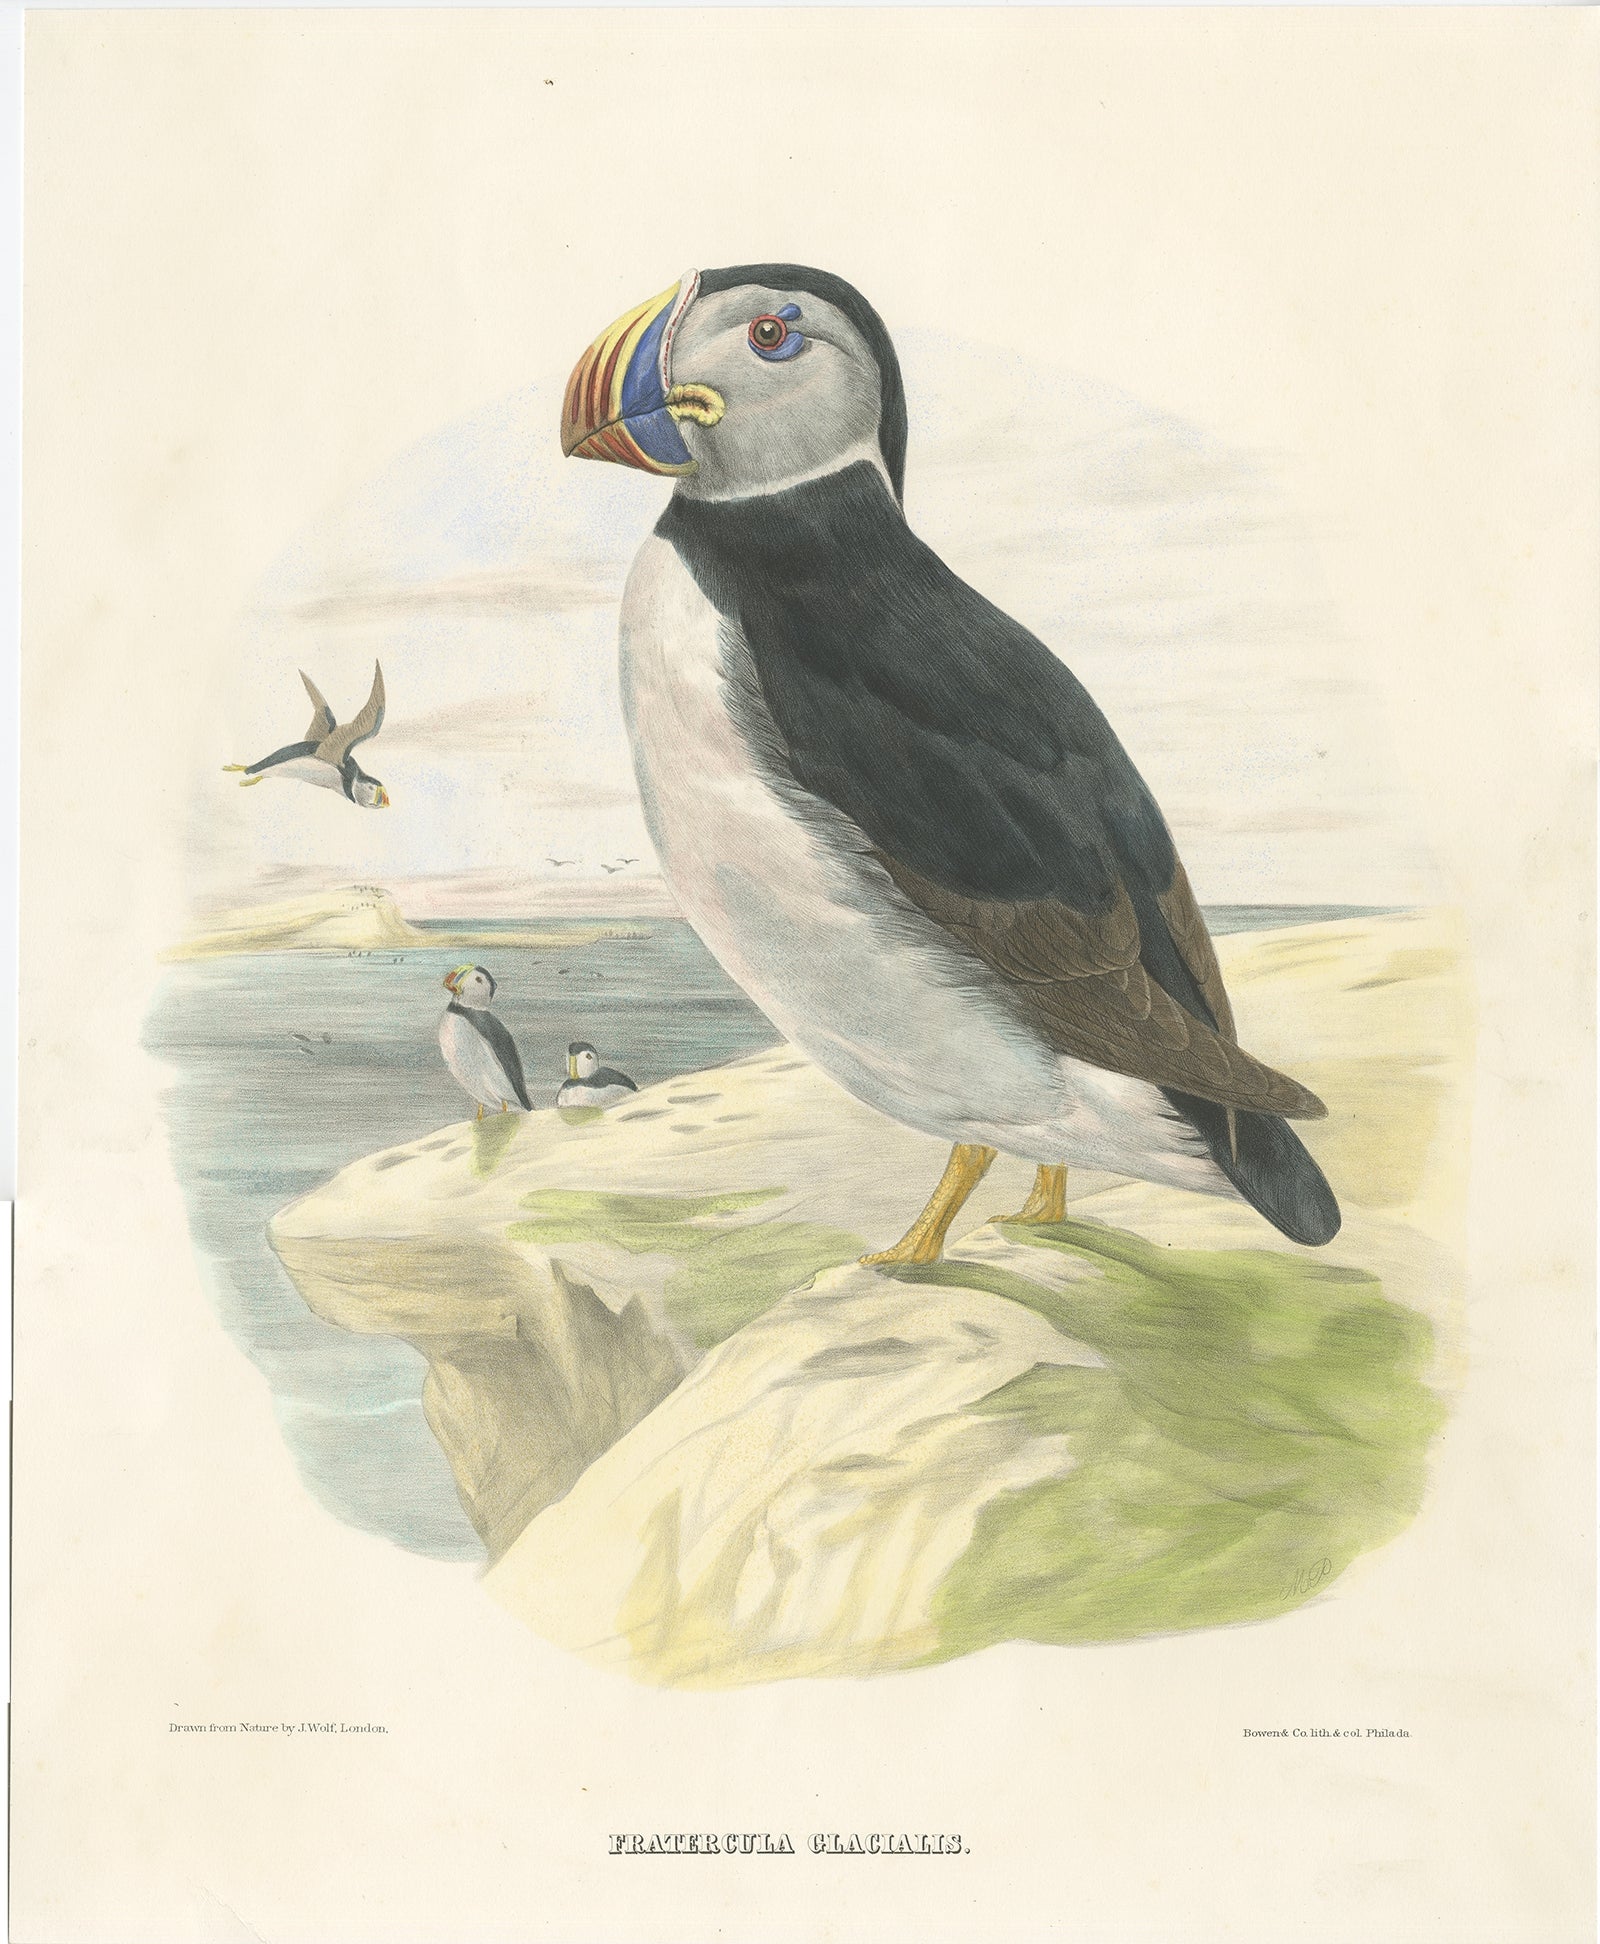 Description: Antique bird print titled 'Fratercula Glacialis'. Old bird print depicting the Large-Bill Puffin. 

This print originates from 'The new and heretofore unfigured species of the birds of North America', published 1866-1869.

This